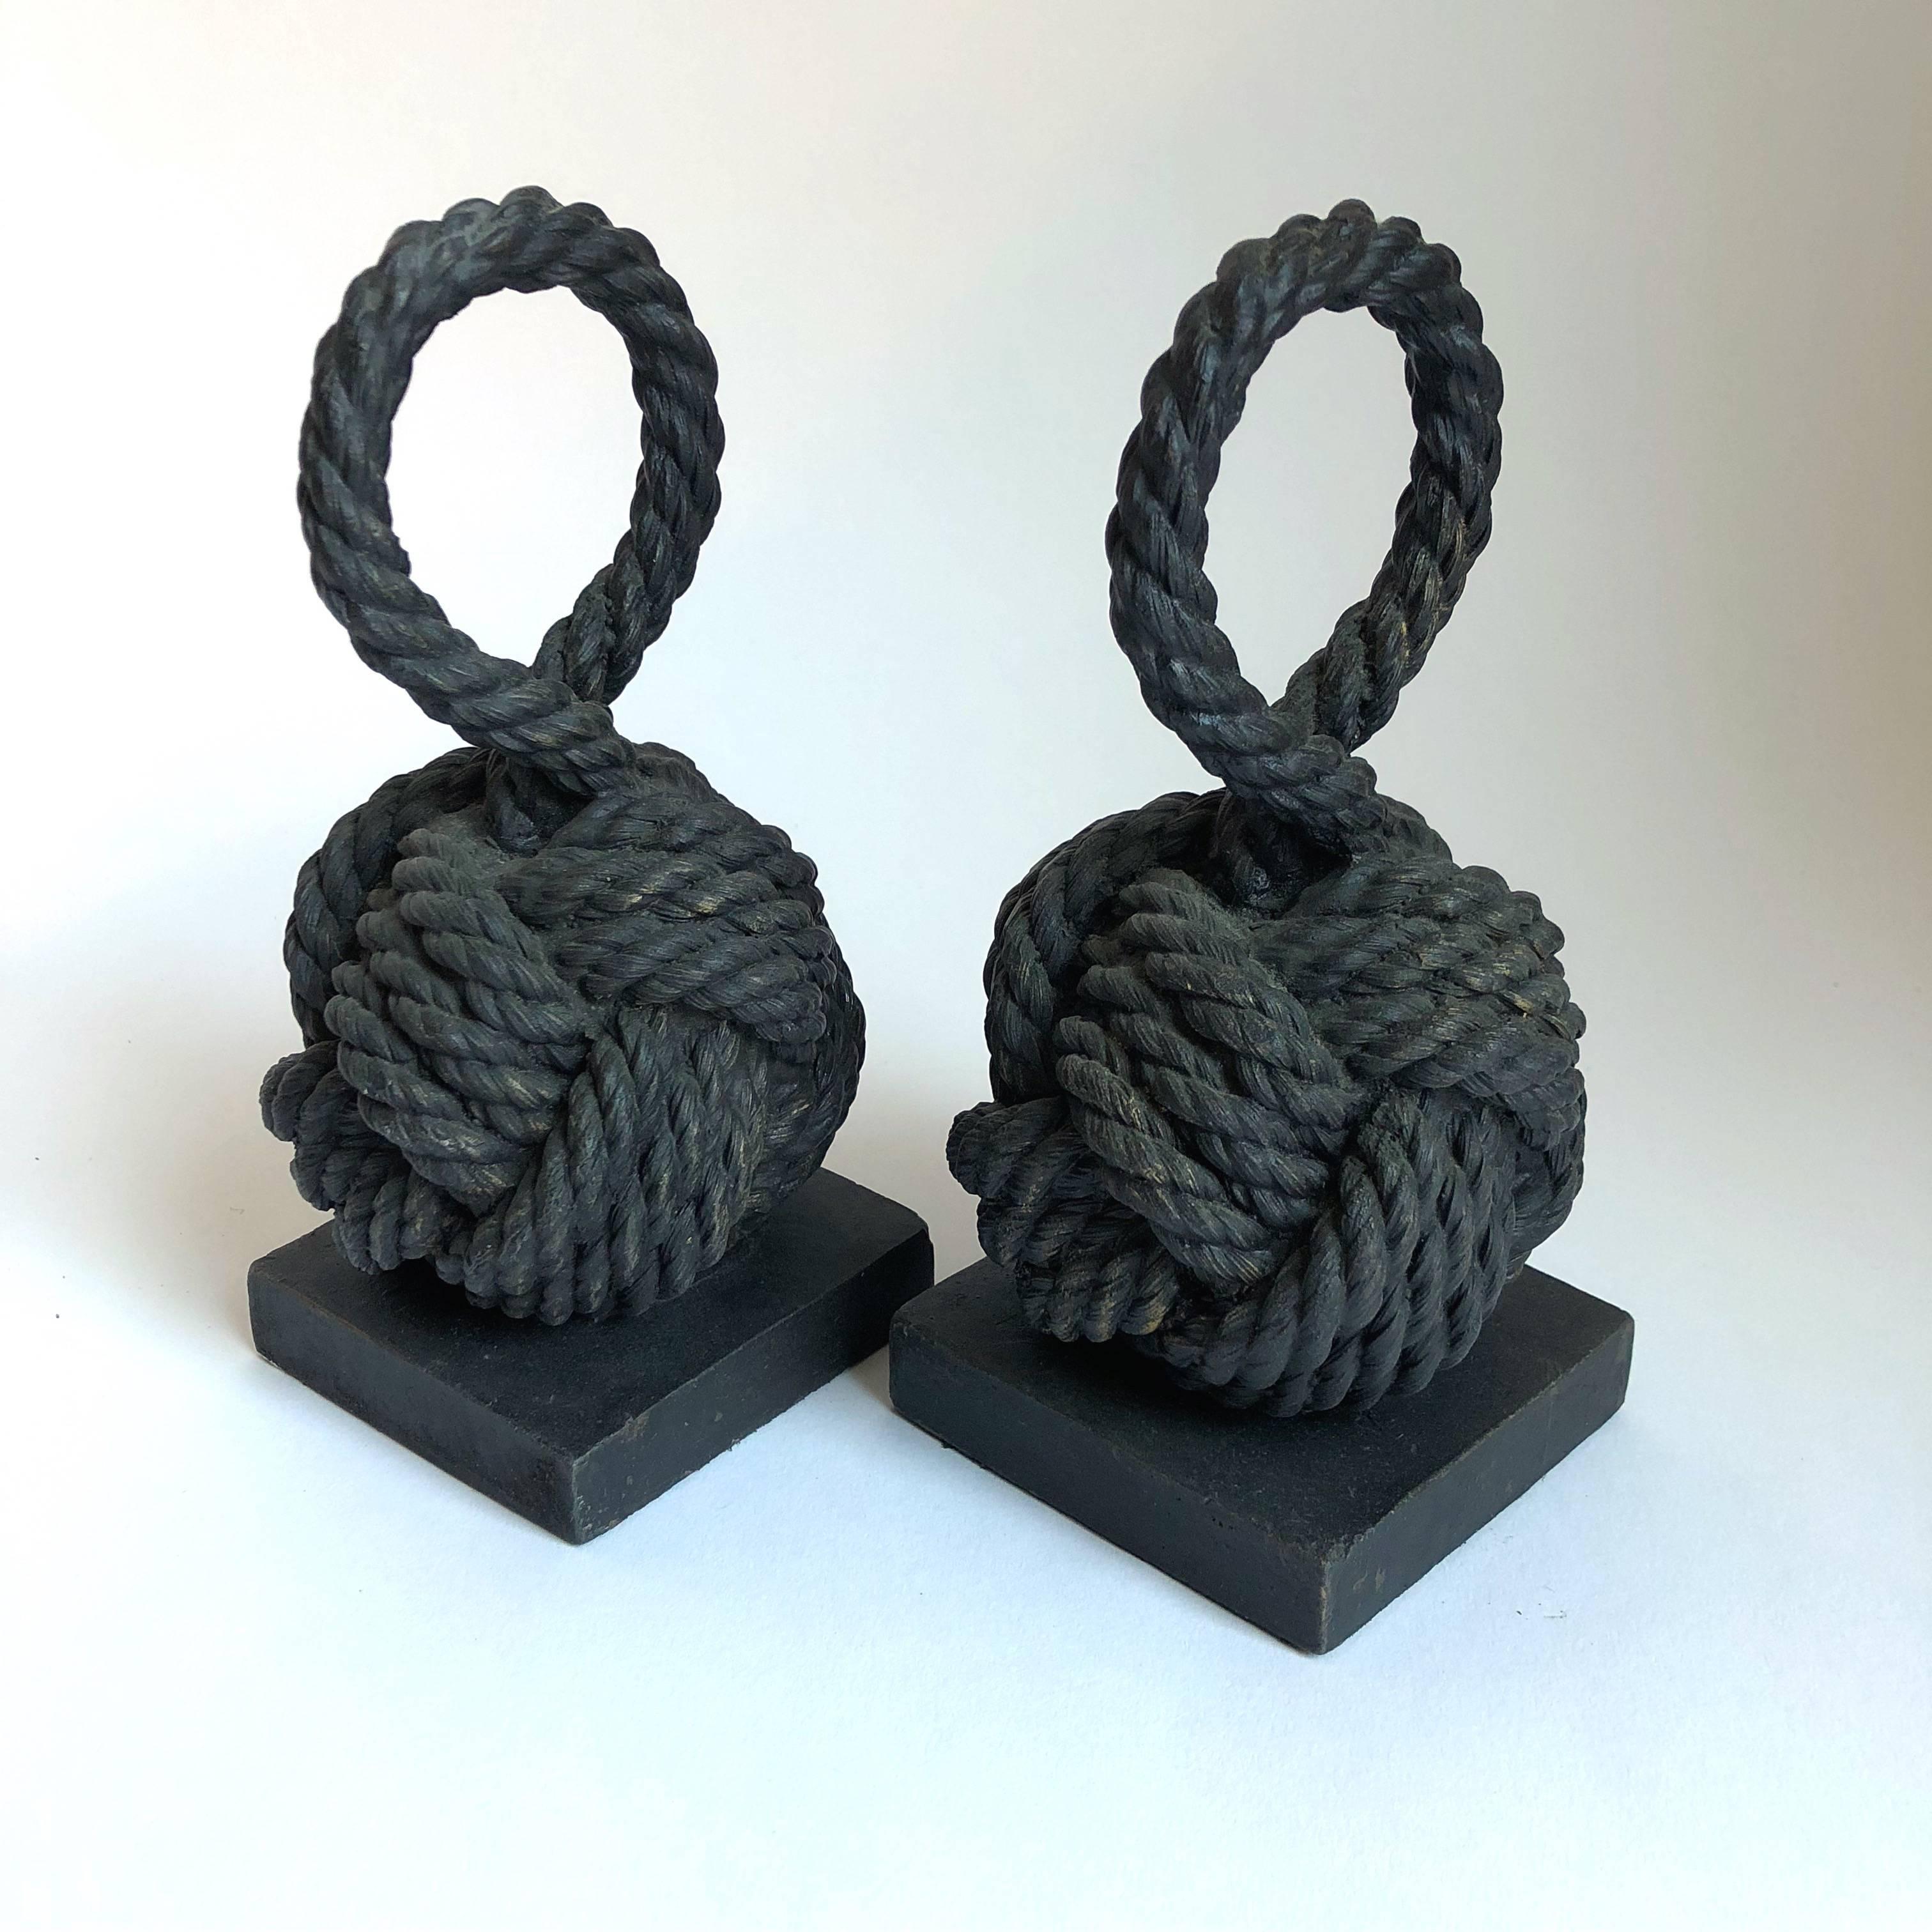 Pair of Bronze Monkey Fist Knot Bookends 2